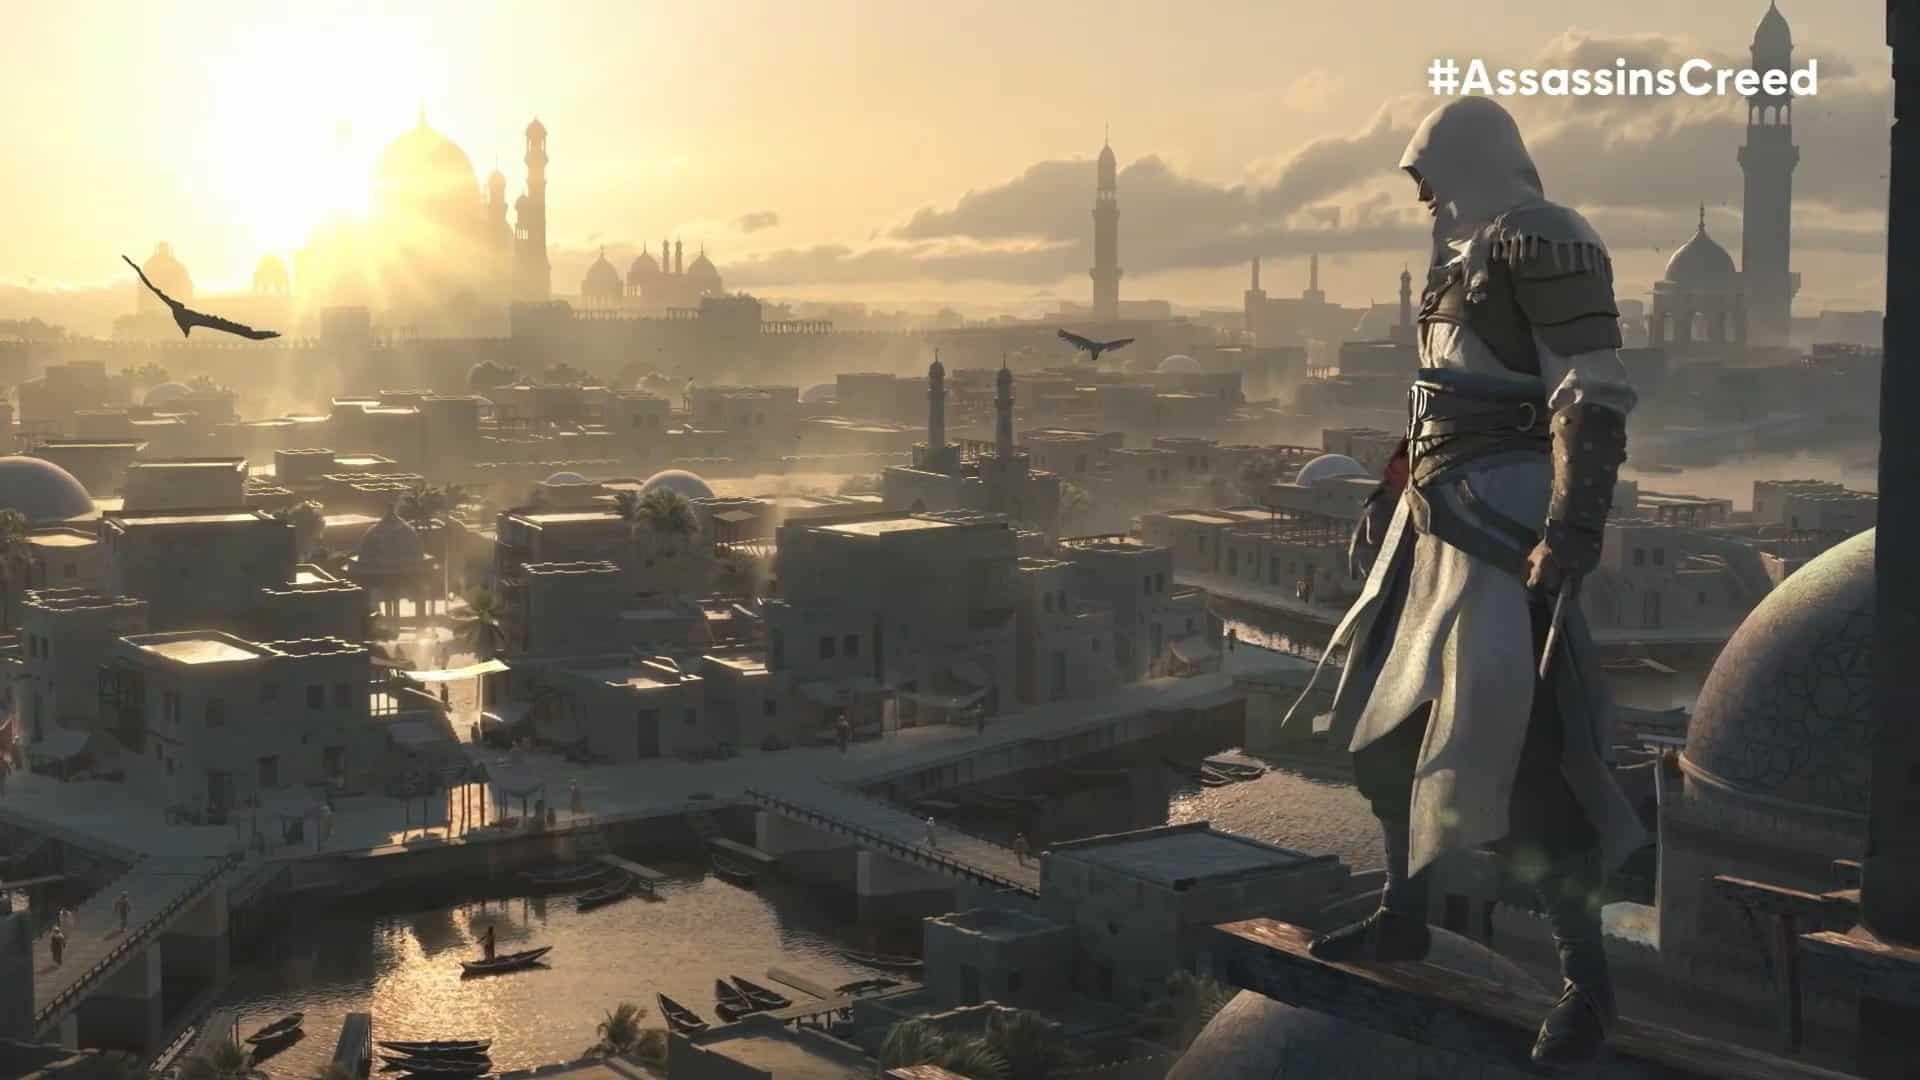 Assassin's Creed Mirage could launch in August 2023 according to reports